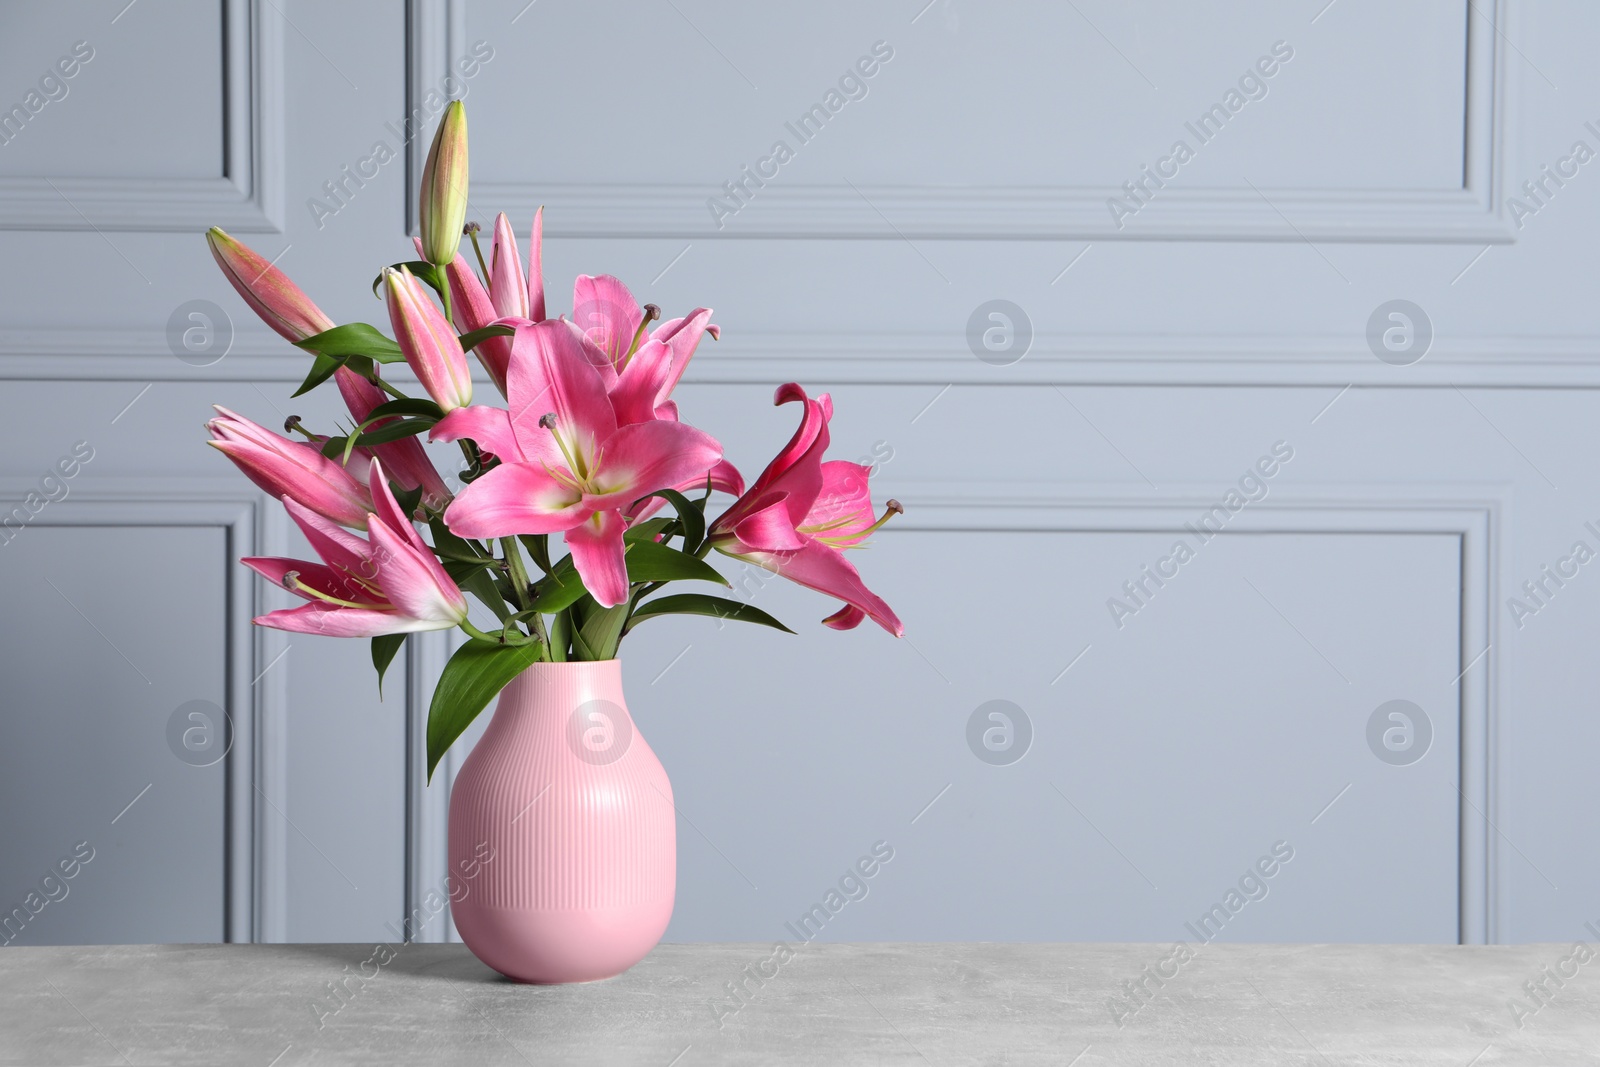 Photo of Beautiful pink lily flowers in vase on table against light wall, space for text